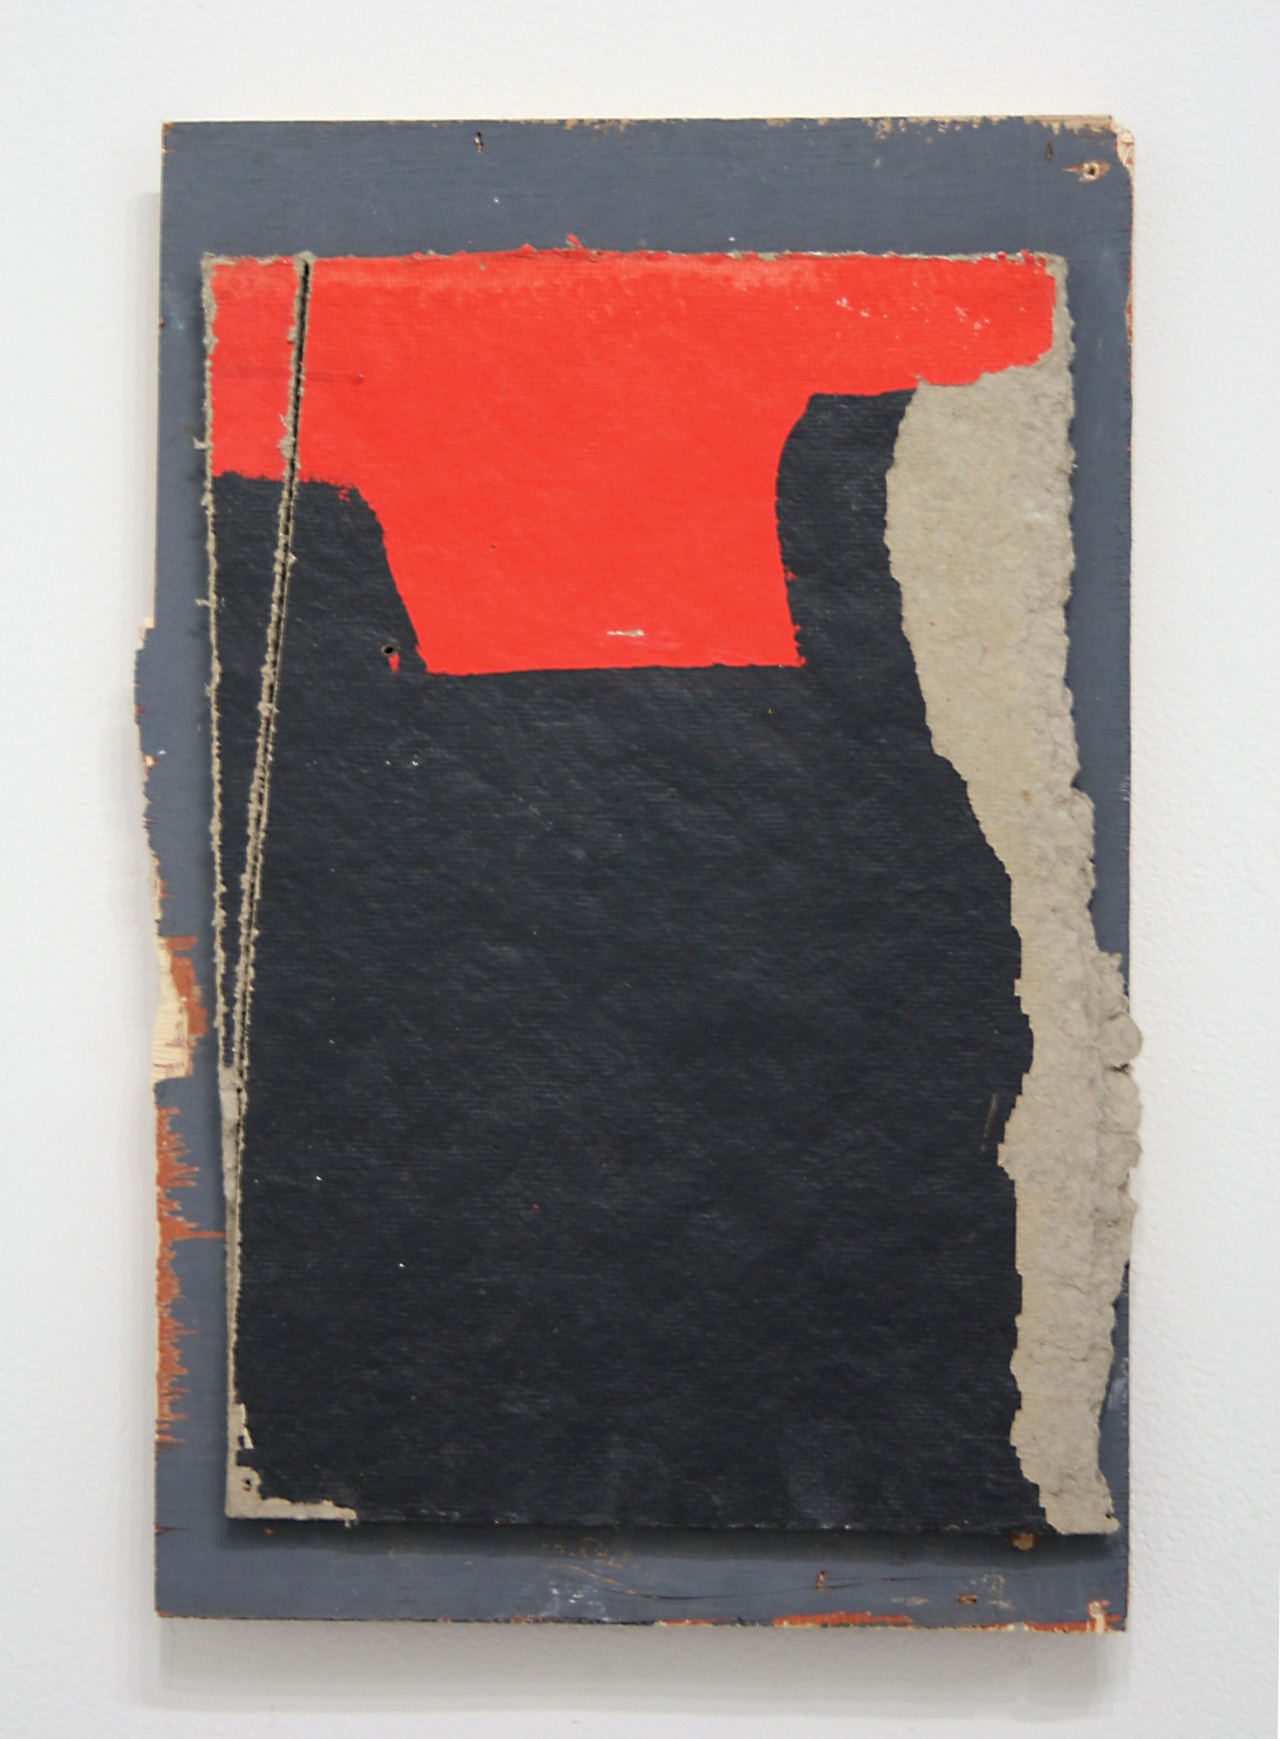 Seth AdelsbergerUntitled (Monk) / 2011found Homosote with paint and found panel on panel / 15 x 11{quote}